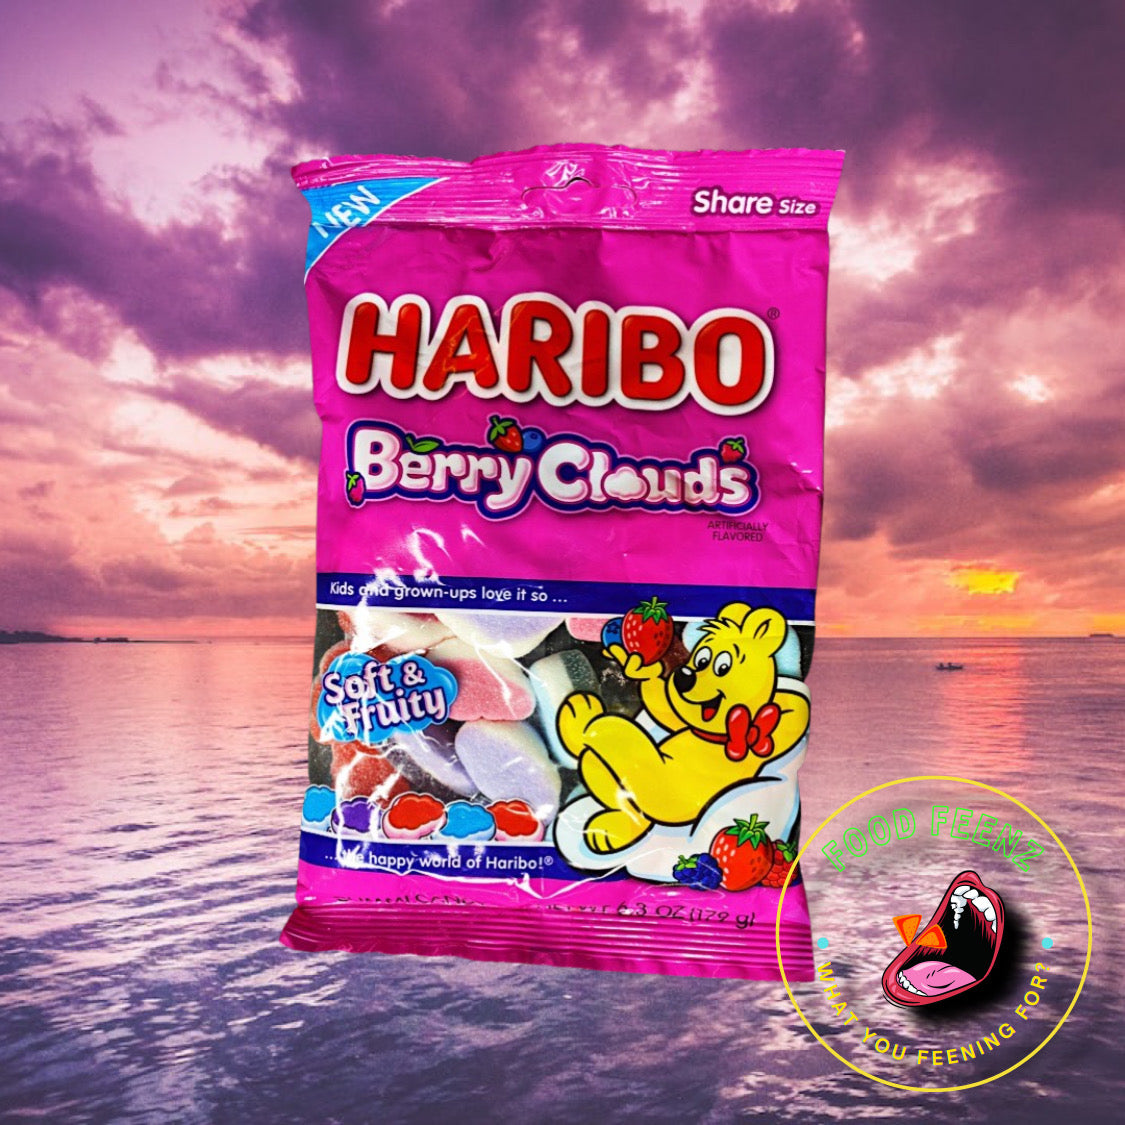 NEW Haribo Berry Clouds